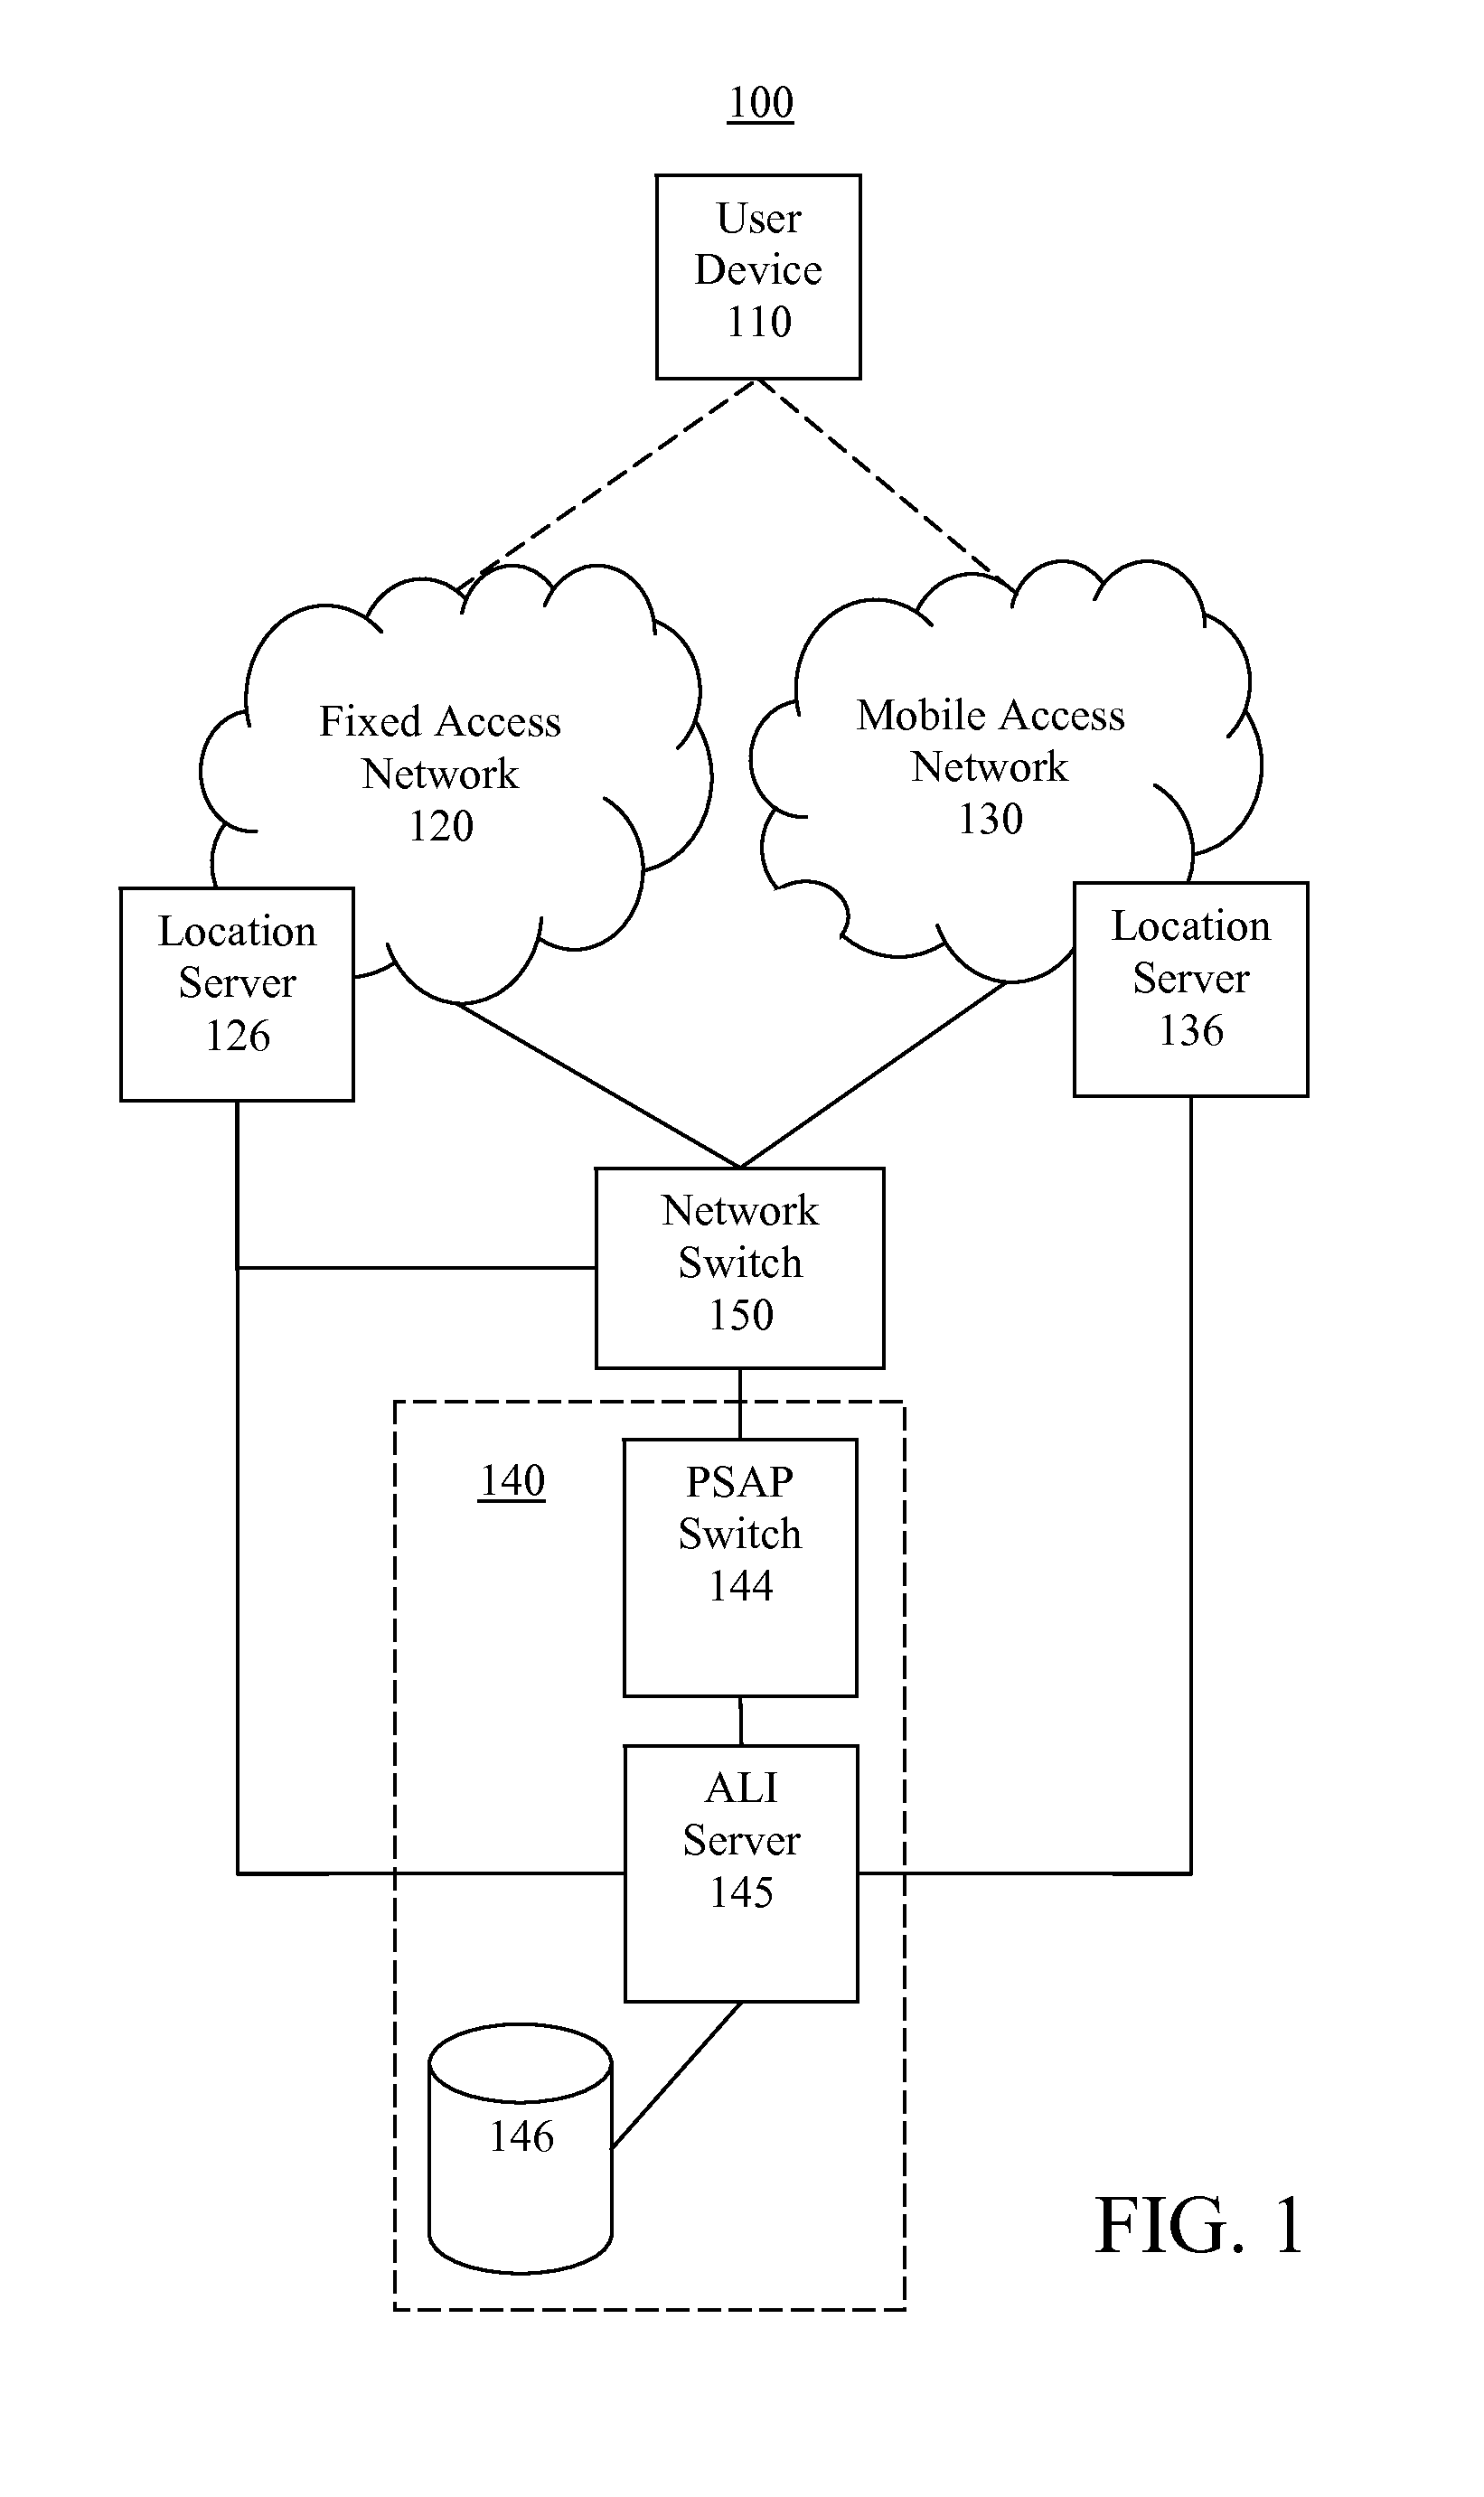 Enabling location determination of user device originating emergency service call